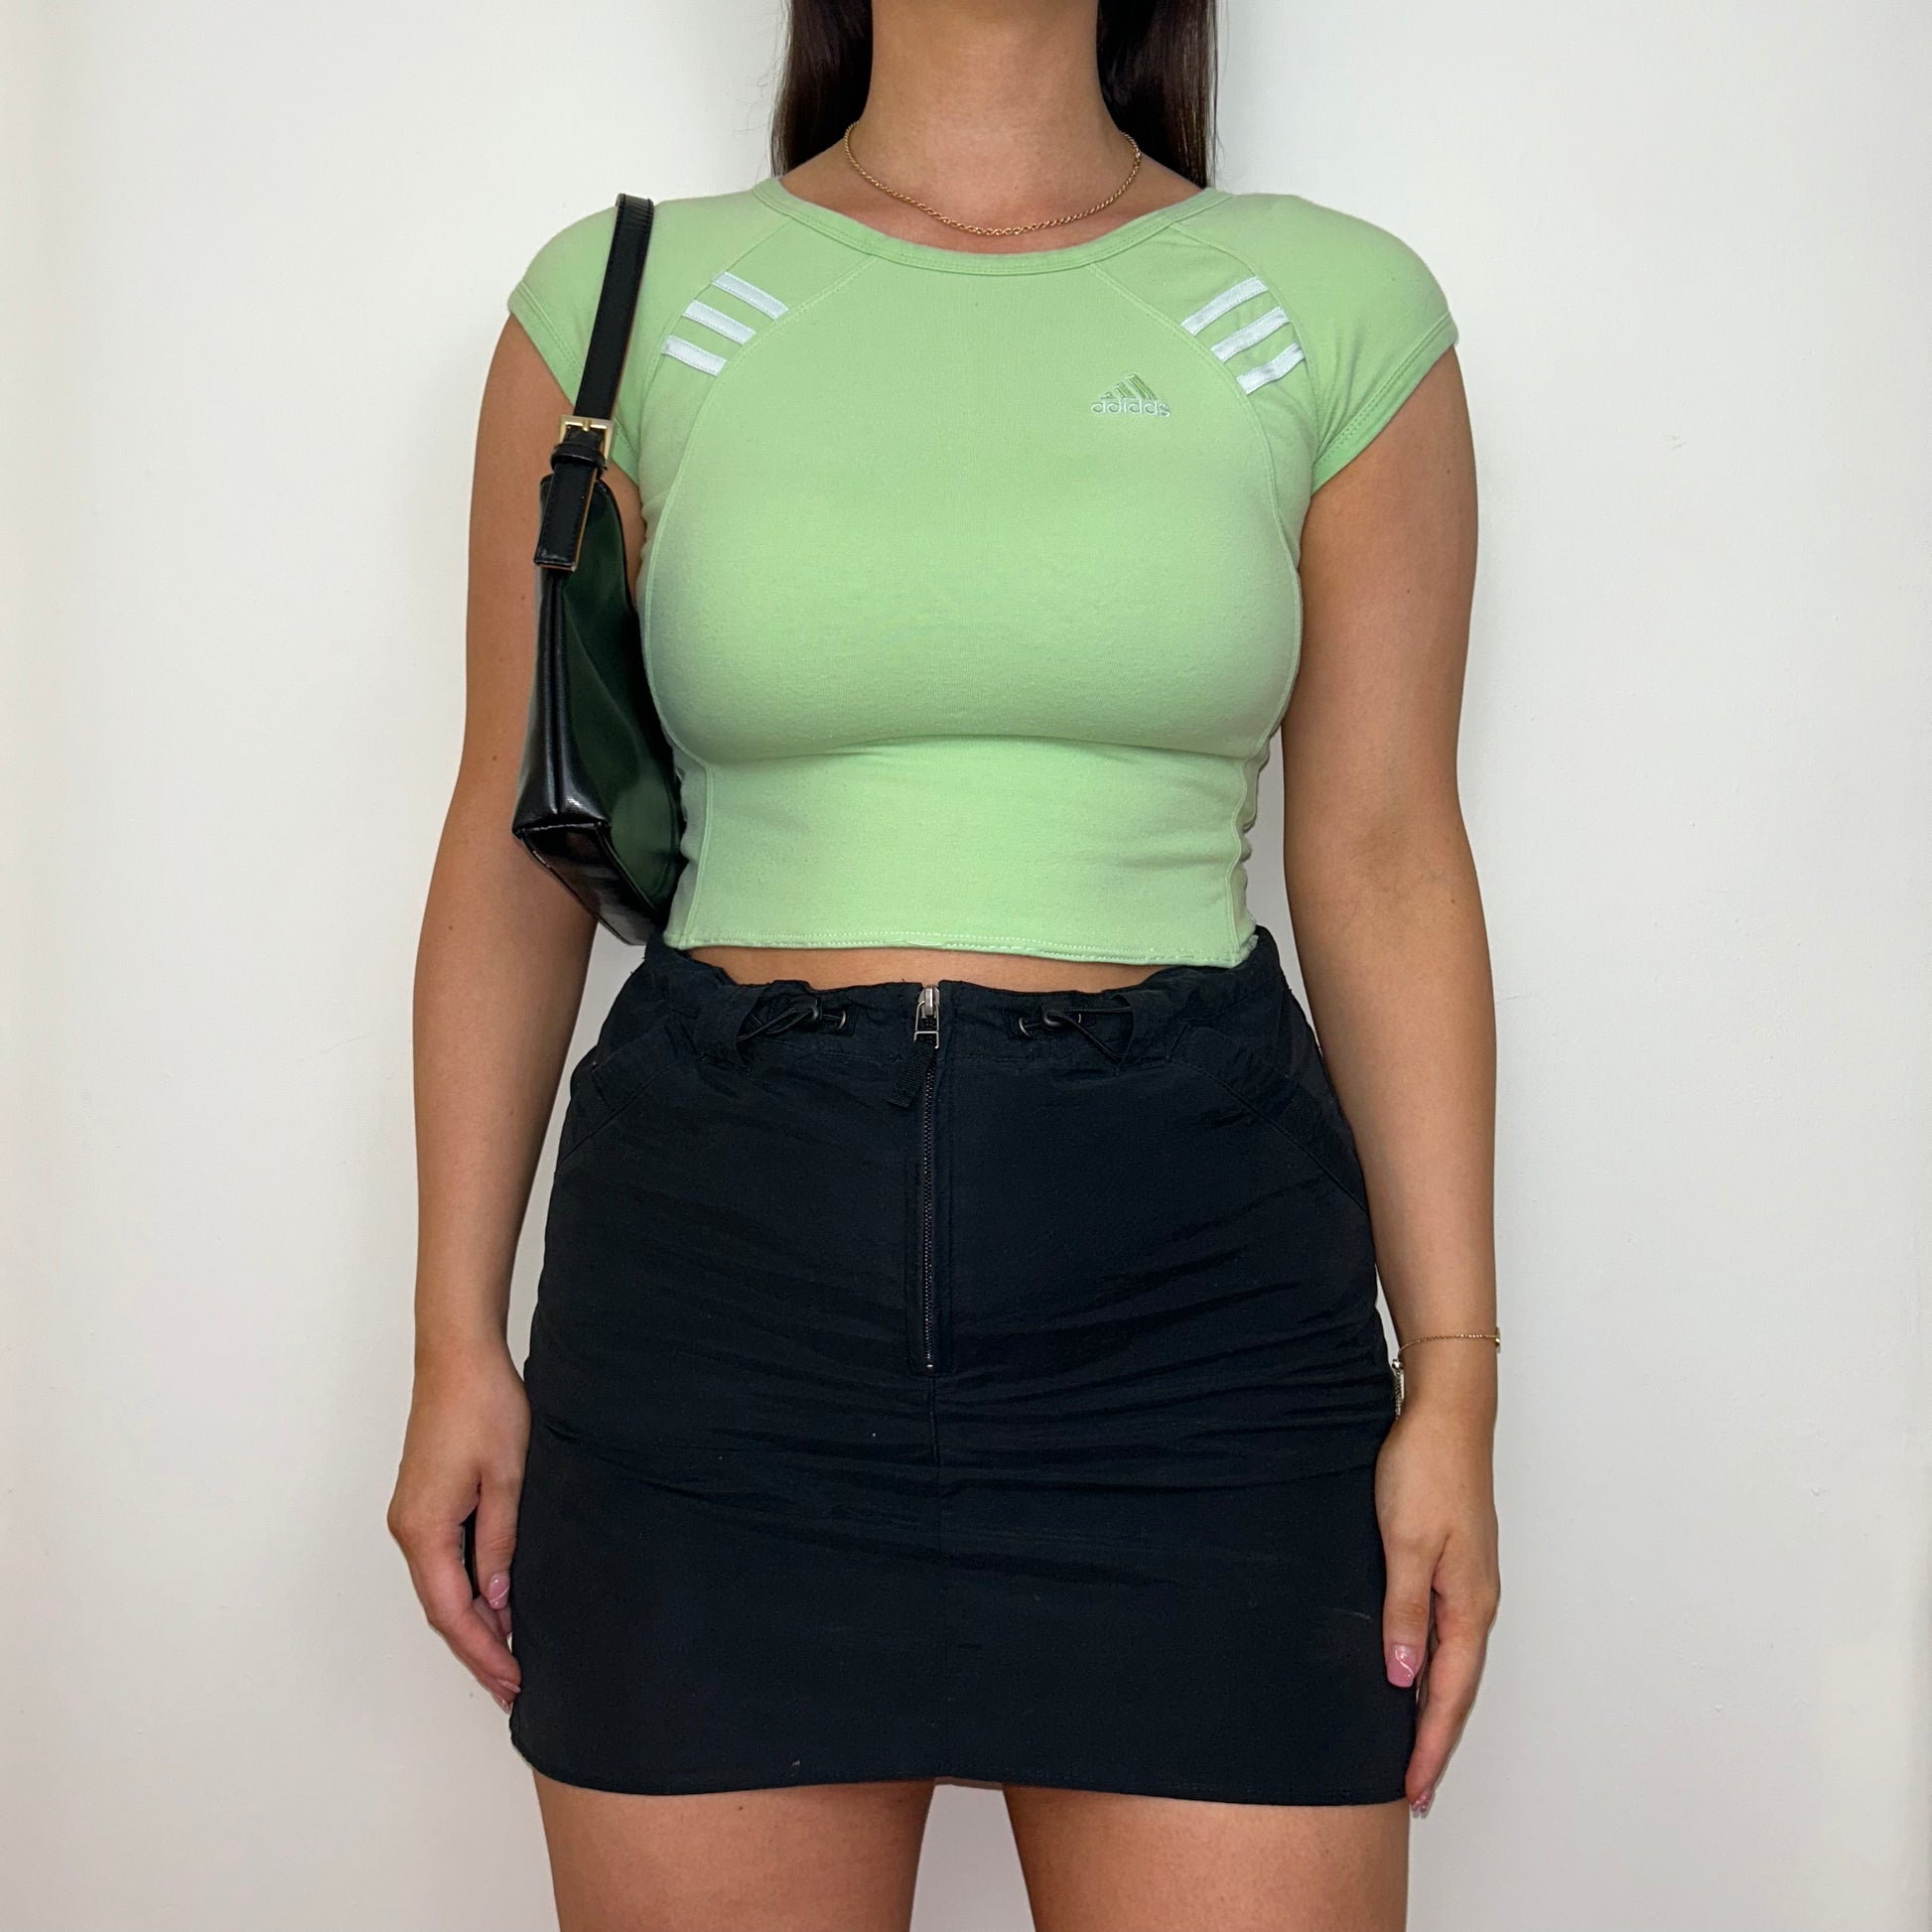 light green short sleeve crop top with white adidas logo shown on a model wearing a black mini skirt with a black shoulder bag